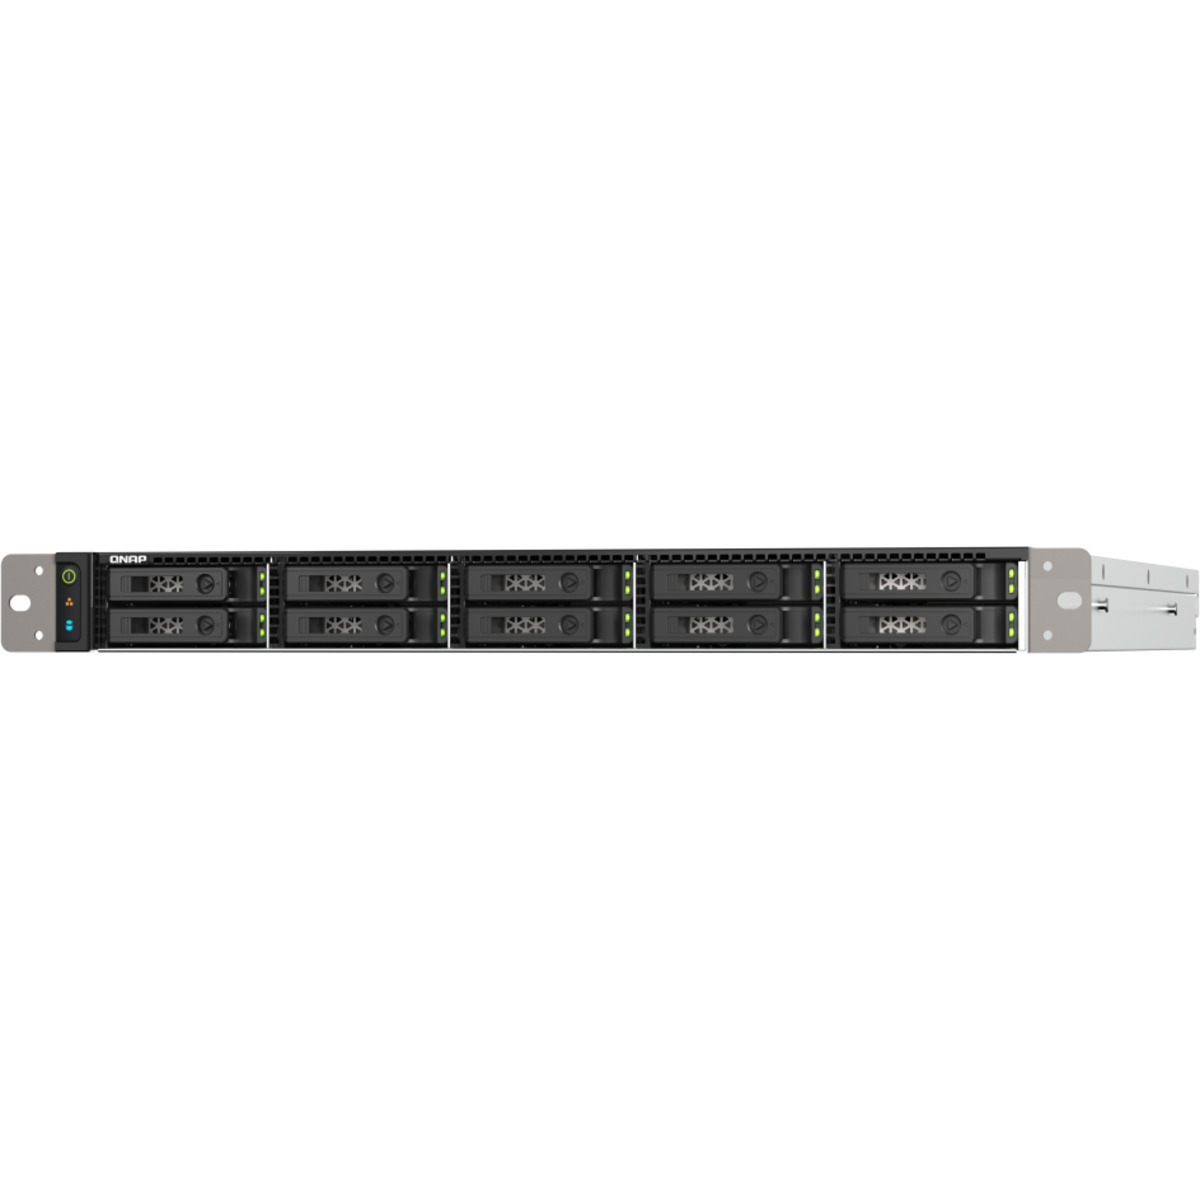 QNAP TS-h1090FU-7302P 5tb 10-Bay RackMount Large Business / Enterprise NAS - Network Attached Storage Device 10x500gb Crucial P3 Plus CT500P3PSSD8  4700/1900MB/s M.2 2280 NVMe SSD CONSUMER Class Drives Installed - Burn-In Tested TS-h1090FU-7302P